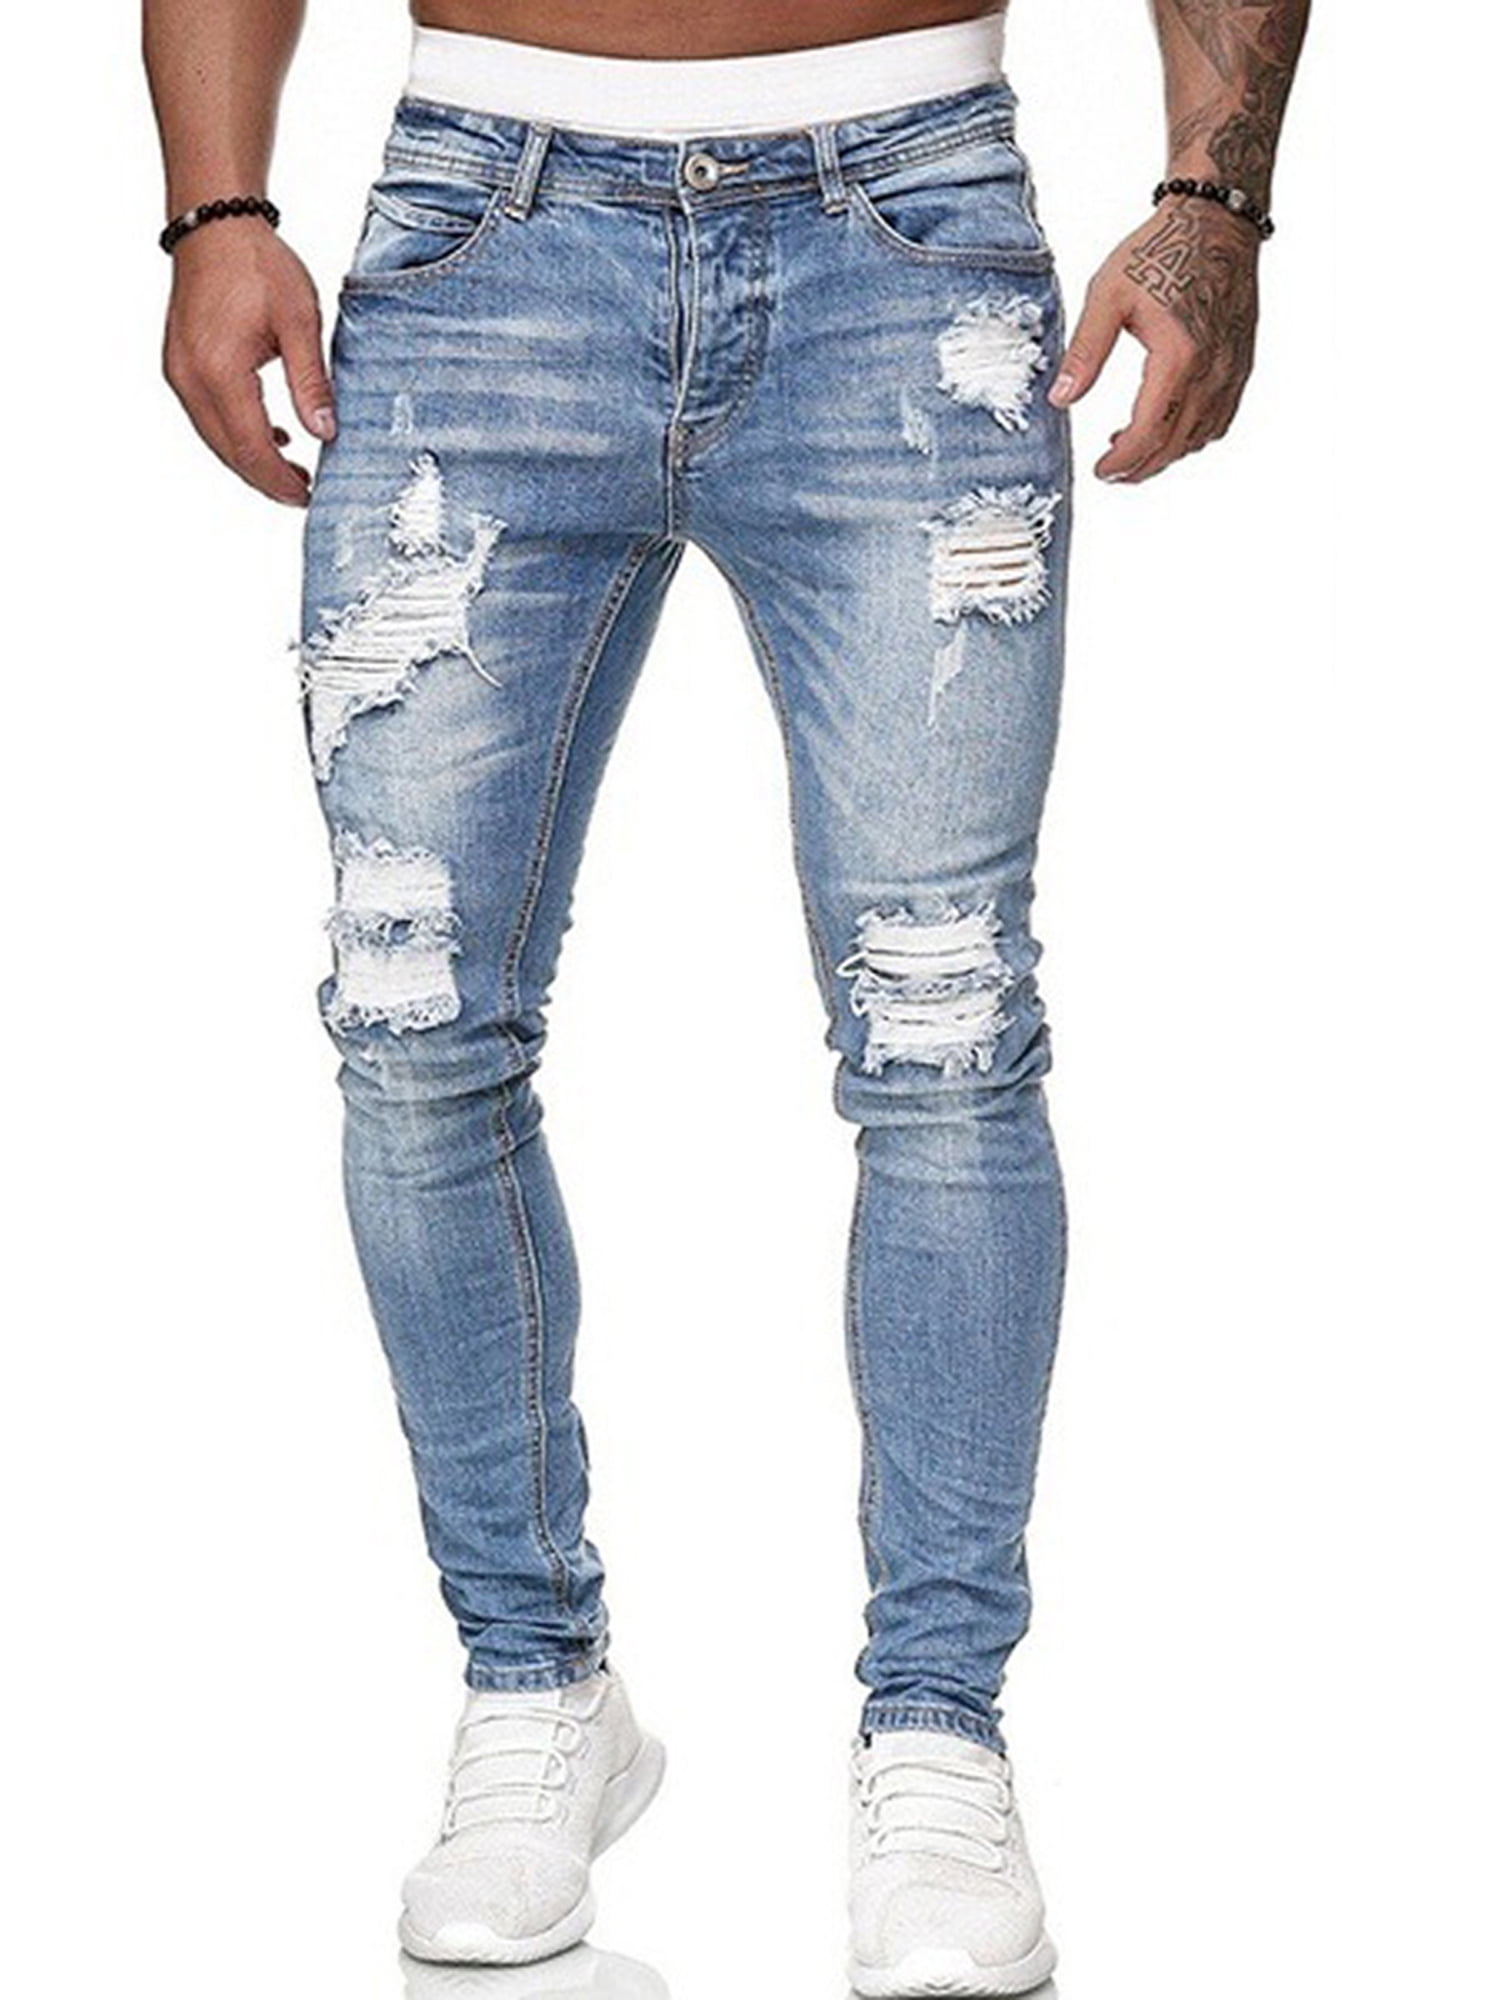 TheFound Men's Jeans Ripped Slim Fit Jeans Stretch Distressed Destroyed  Skinny Zipper Straight Leg Denim Pants Light Blue S